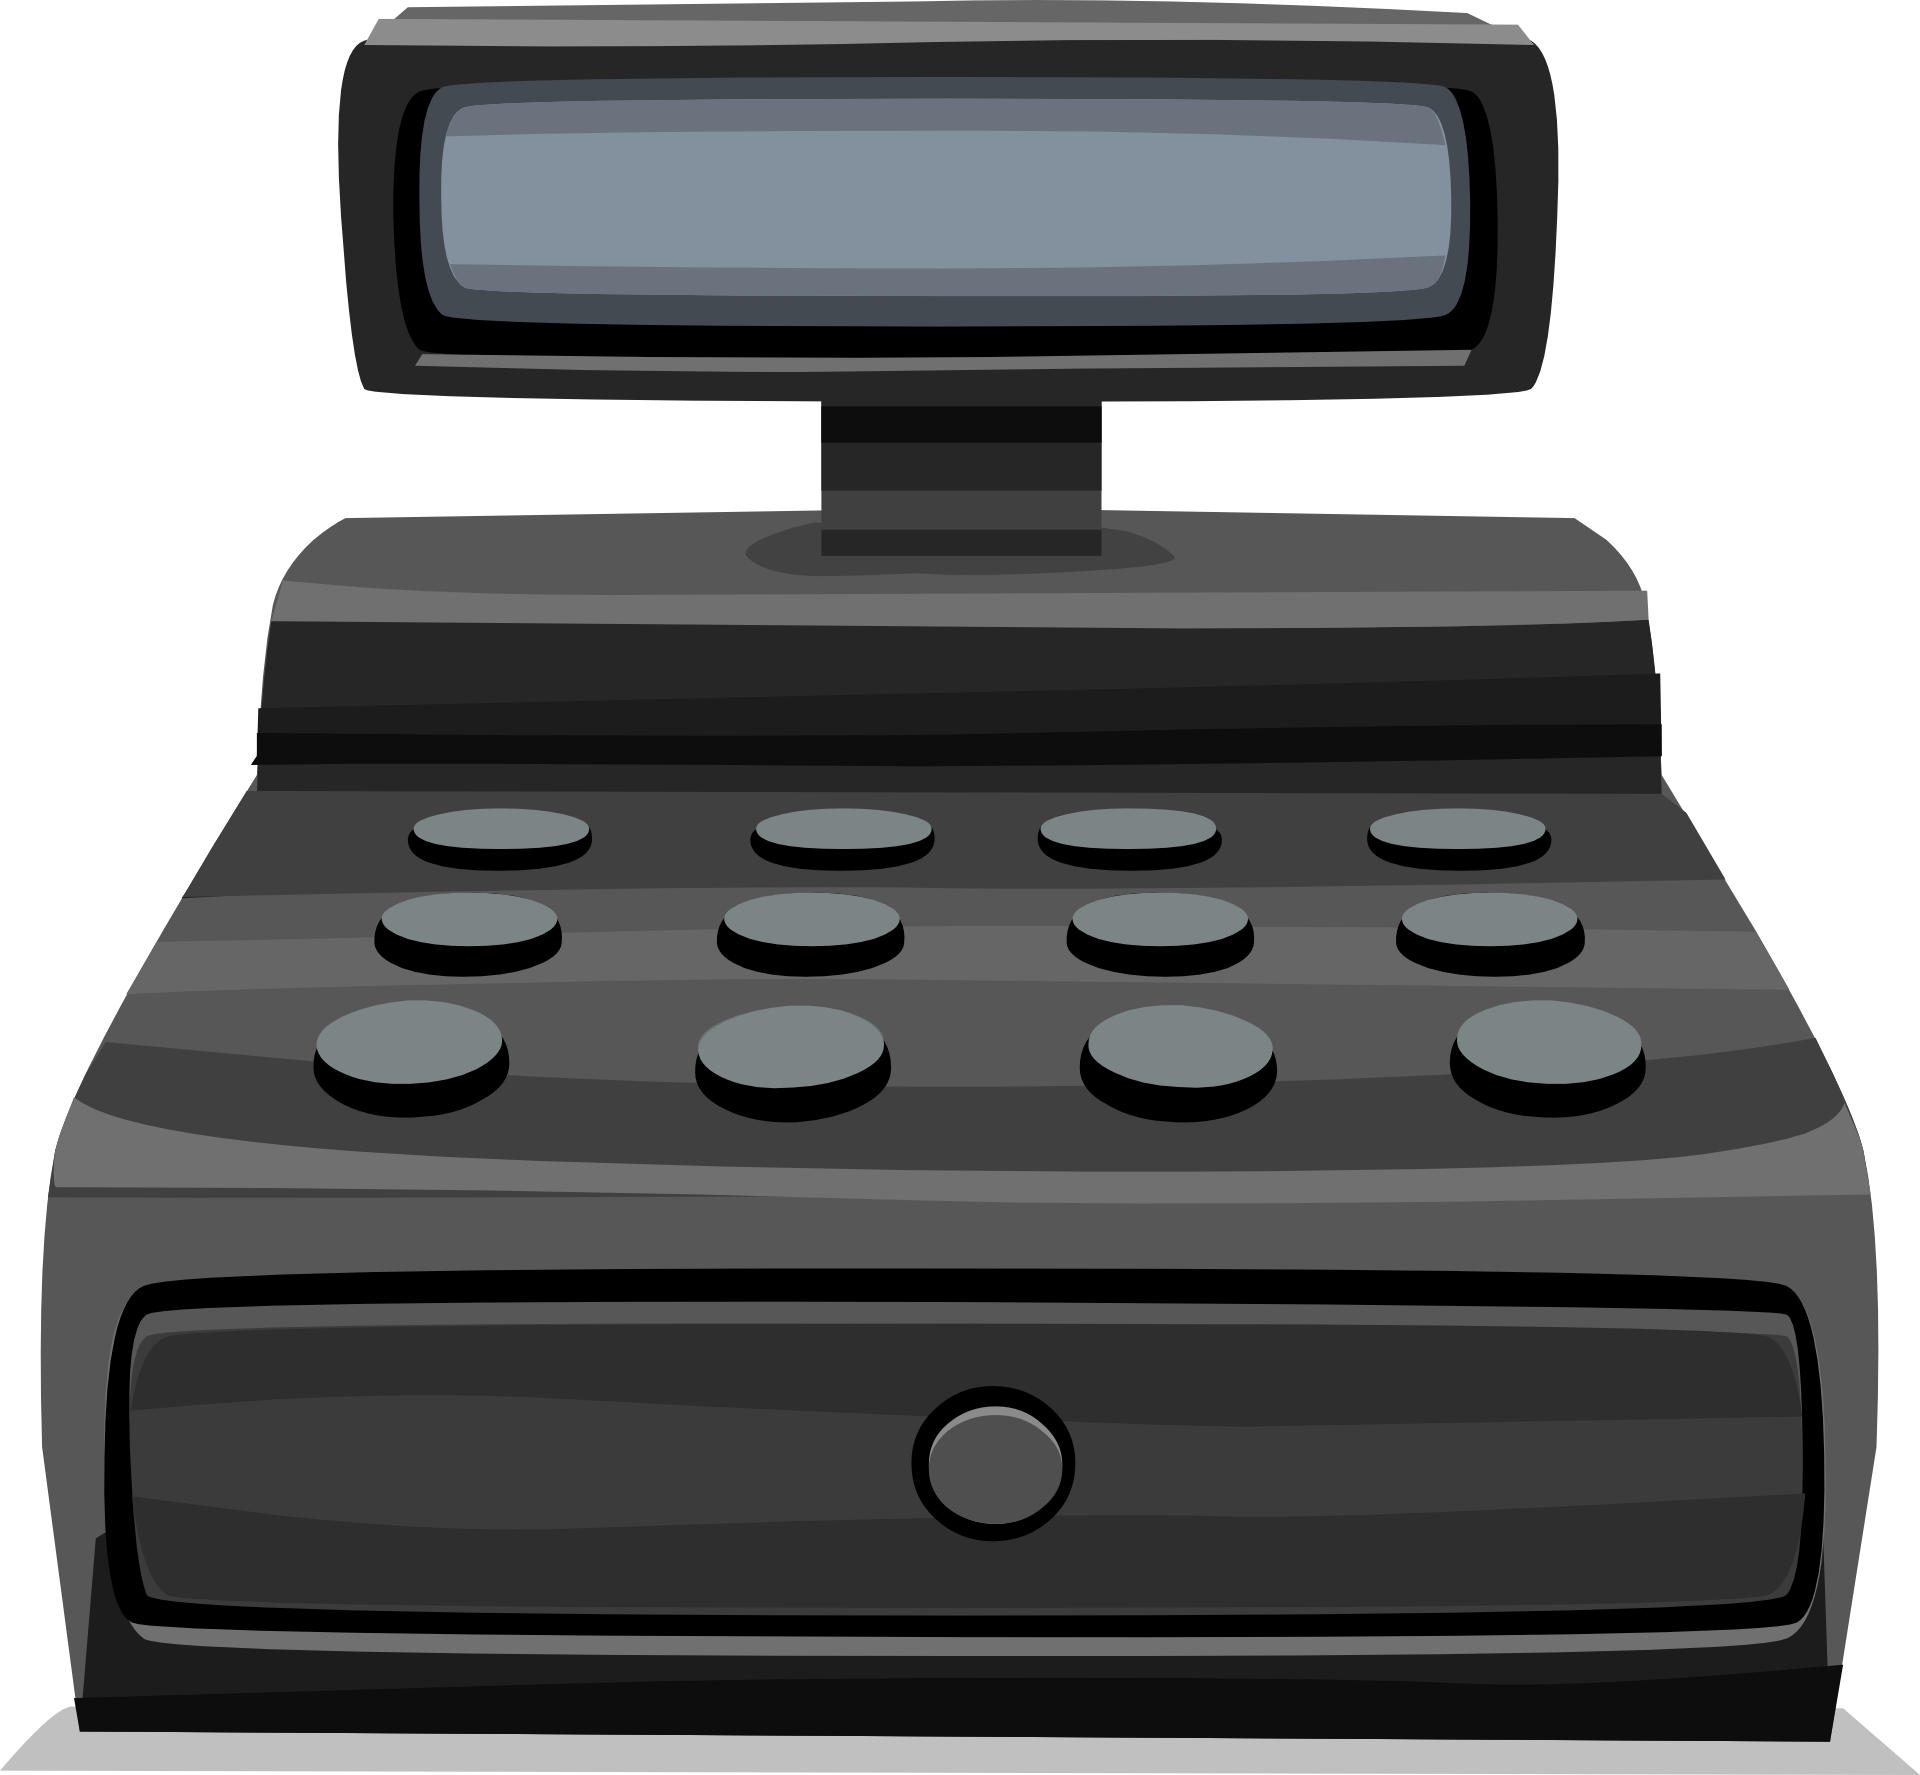 Drawing of a cash register free image download